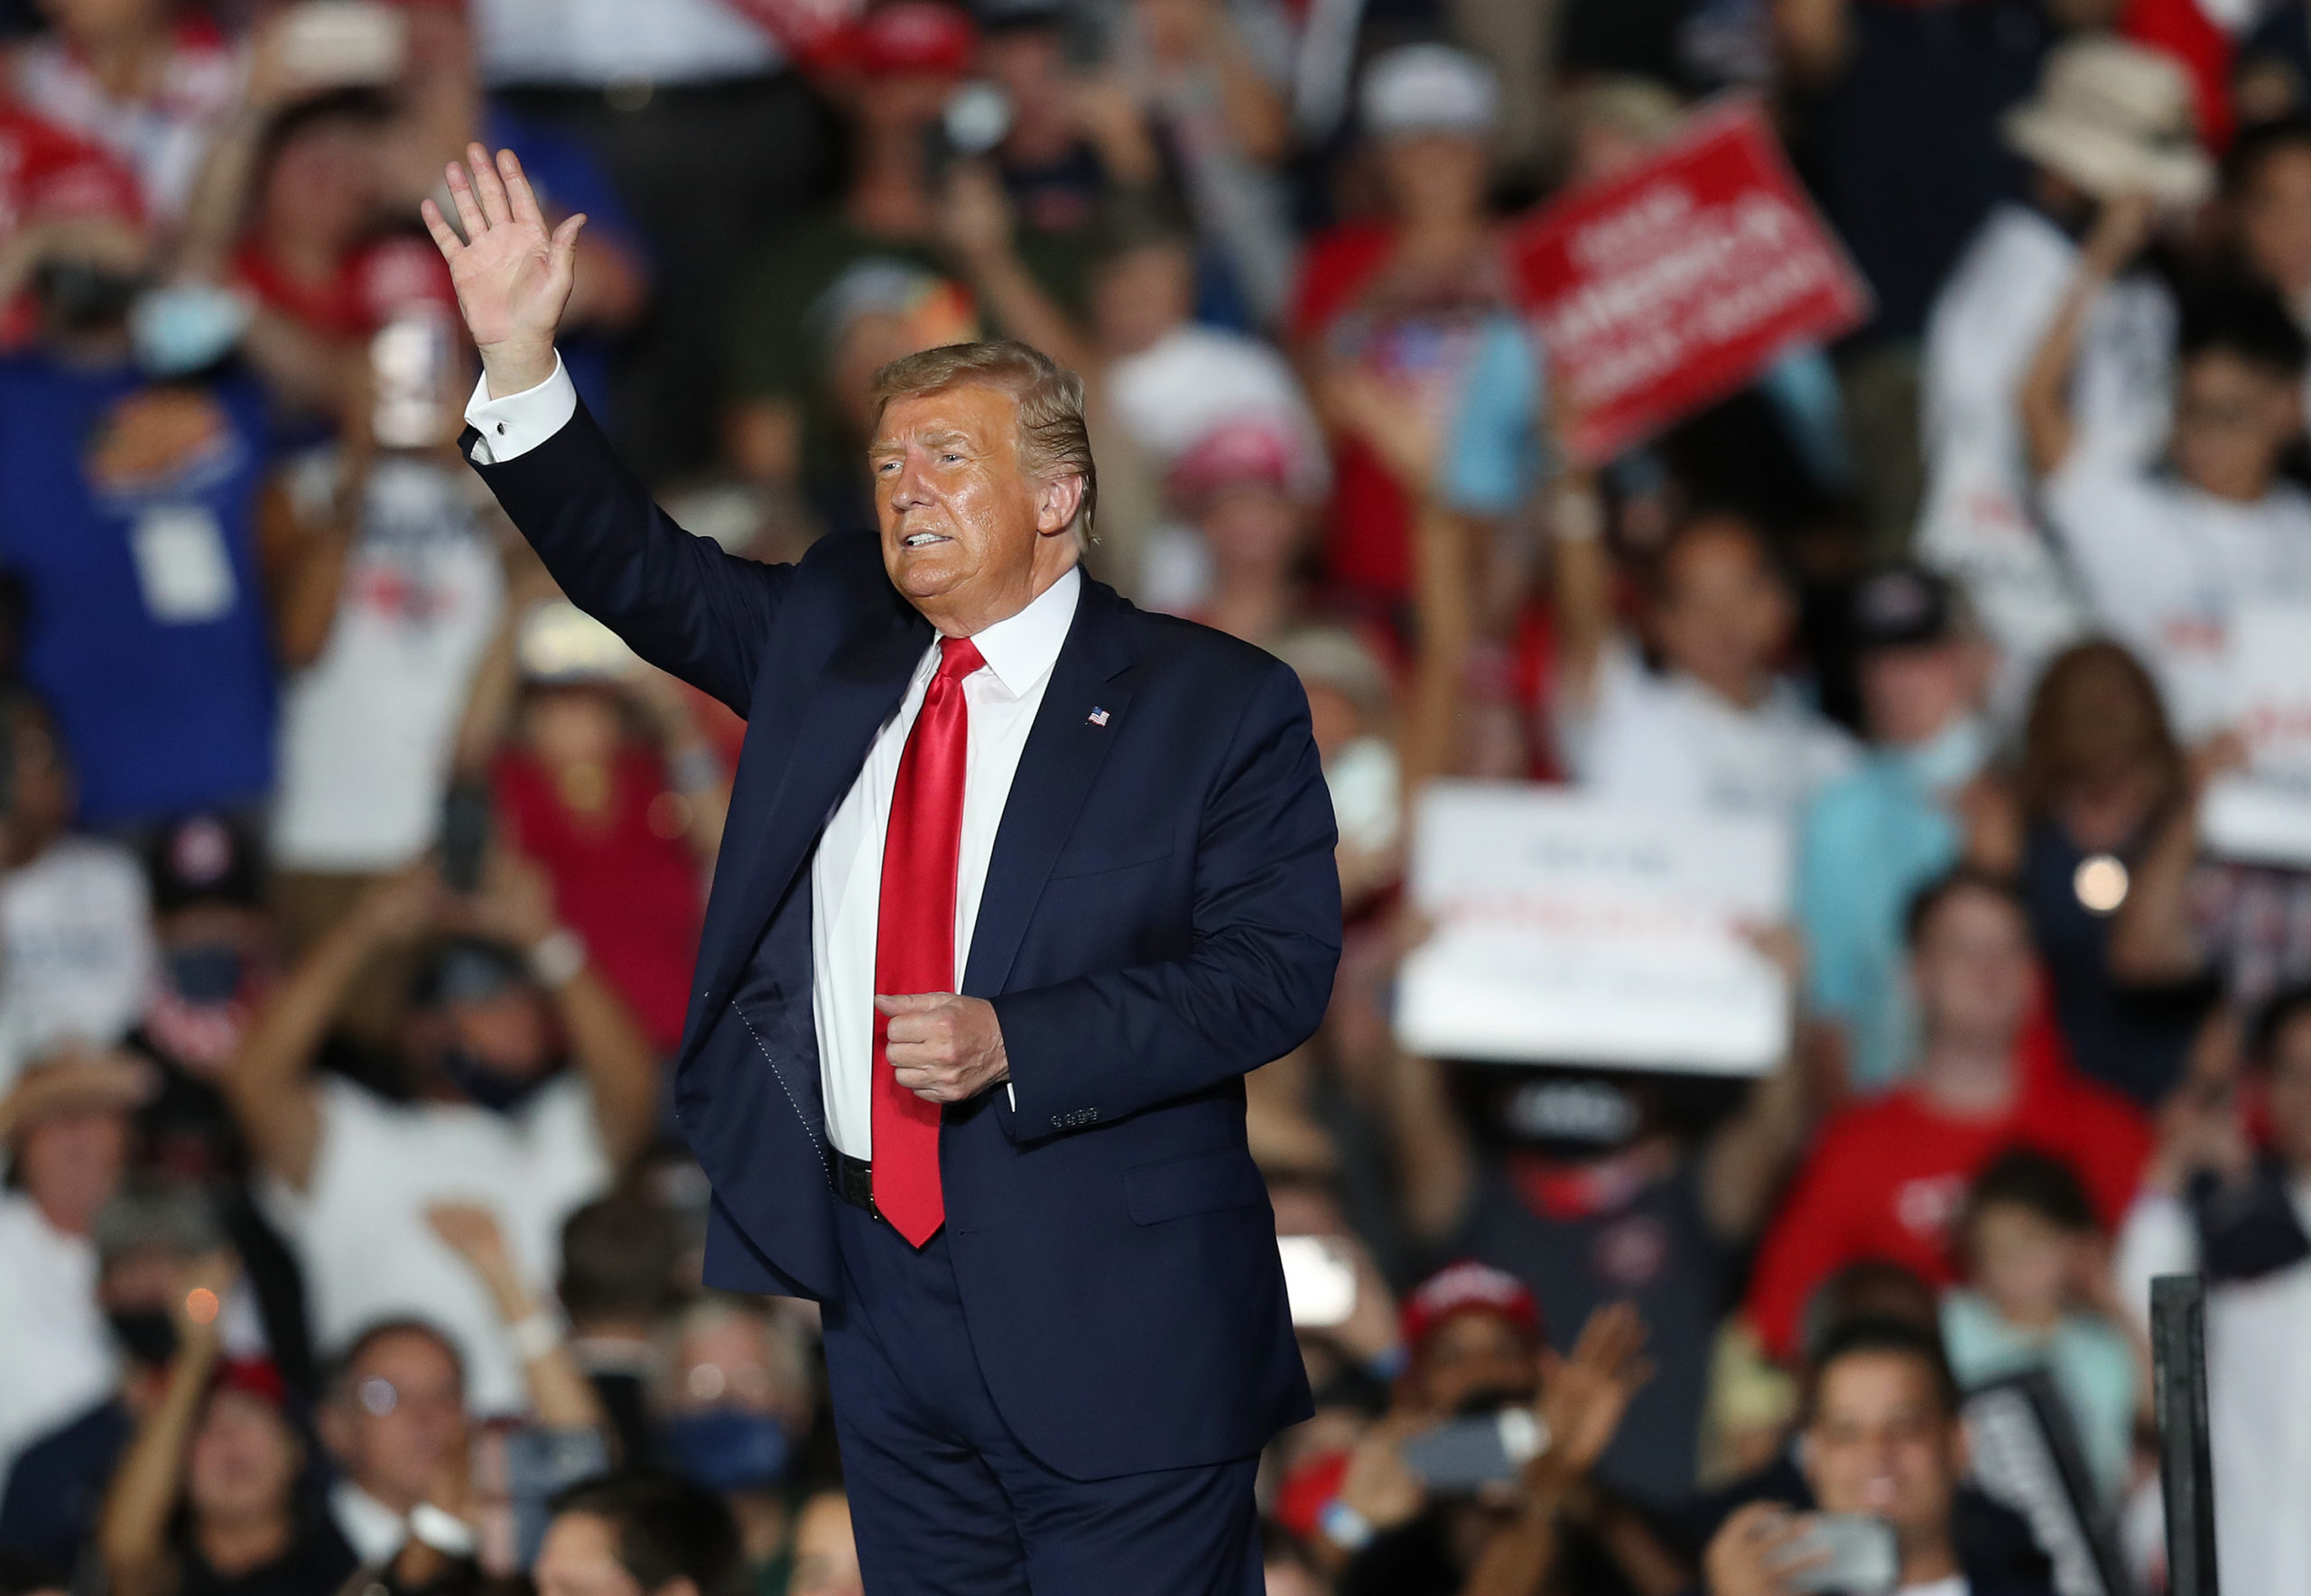 President Donald Trump waves to the crowd as he leaves after speaking during a campaign event at the Orlando Sanford International Airport on October 12, 2020 in Sanford, Florida. 